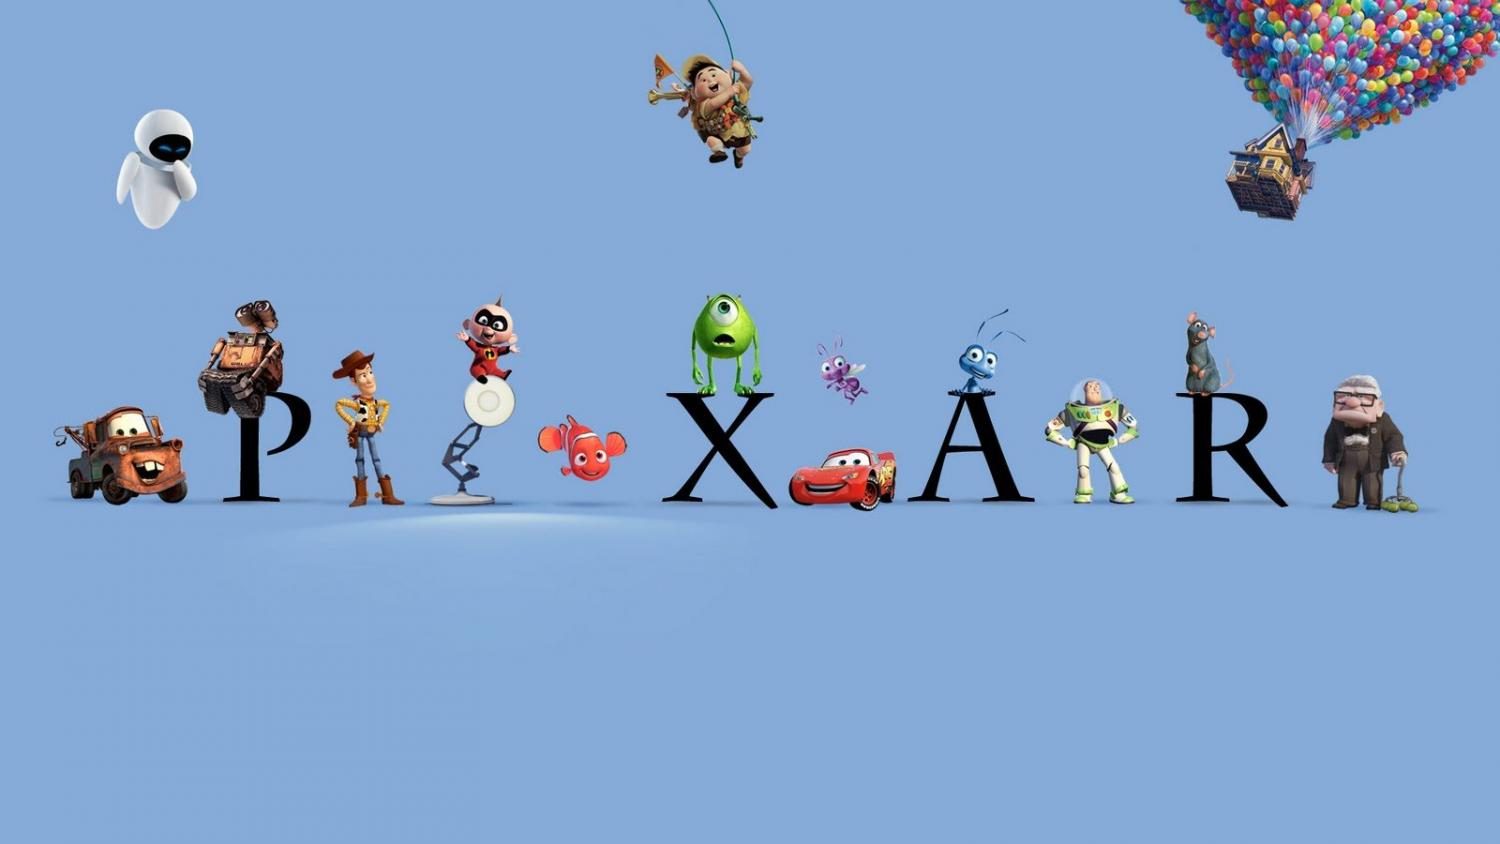 The Pixar theory proves Pixar as one universe